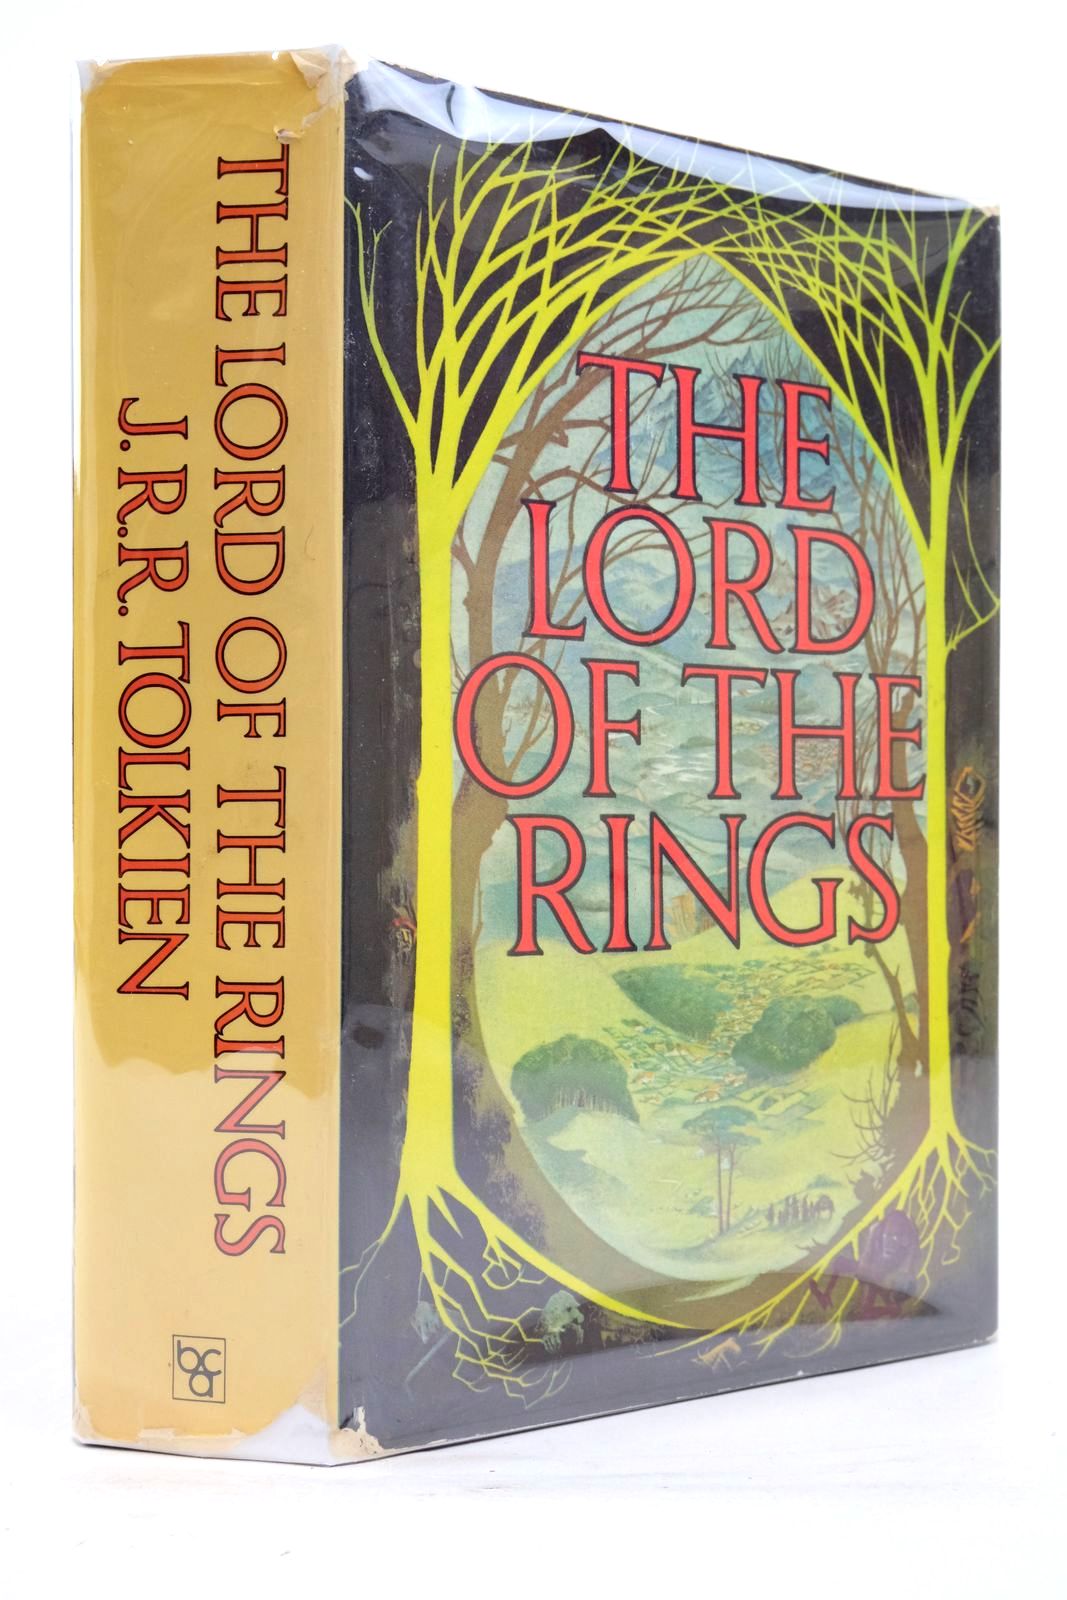 Photo of THE LORD OF THE RINGS written by Tolkien, J.R.R. published by Book Club Associates, Guild Publishing (STOCK CODE: 2137926)  for sale by Stella & Rose's Books